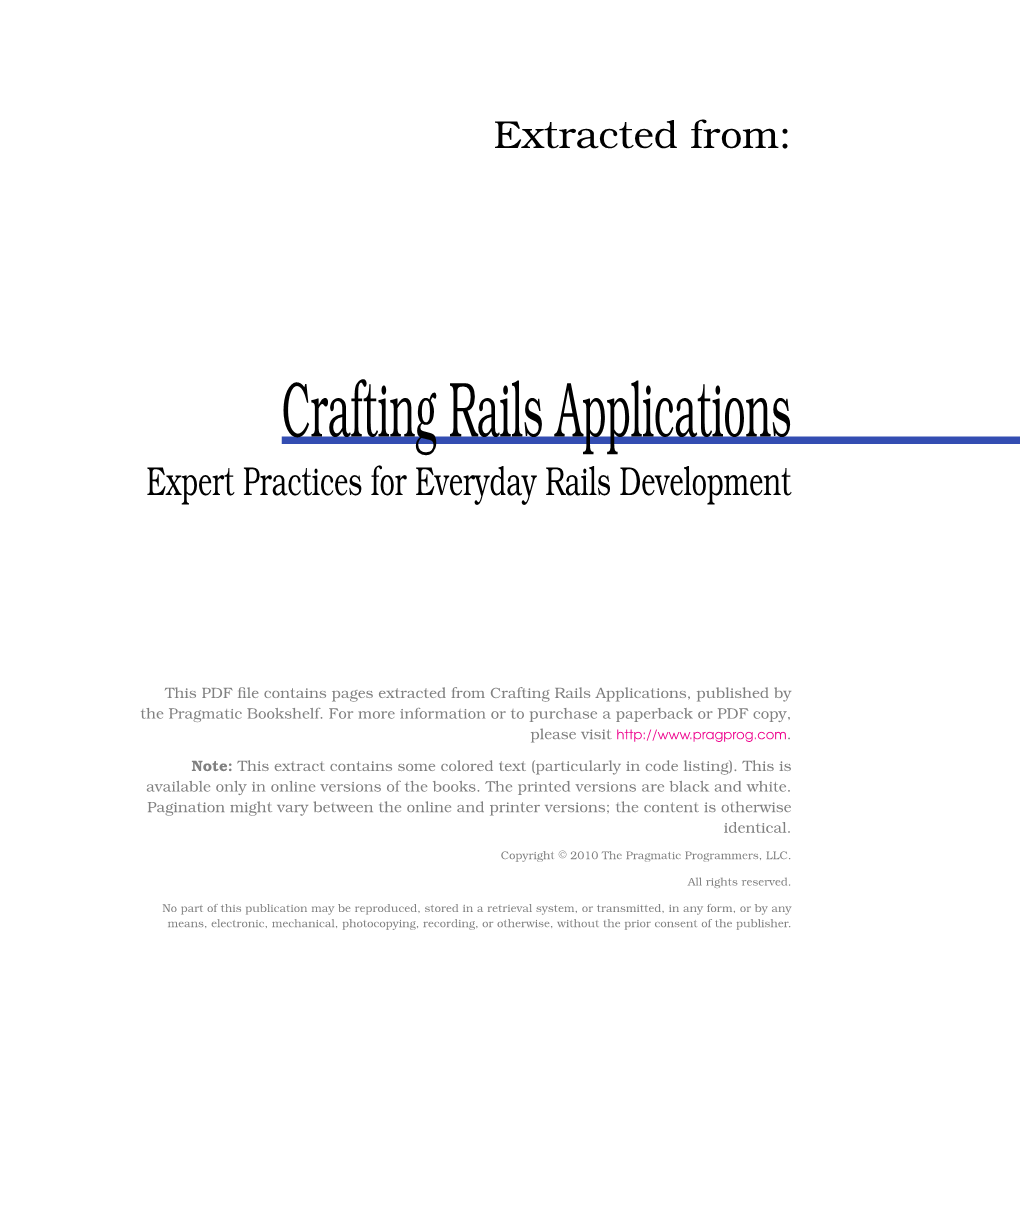 Crafting Rails Applications Expert Practices for Everyday Rails Development